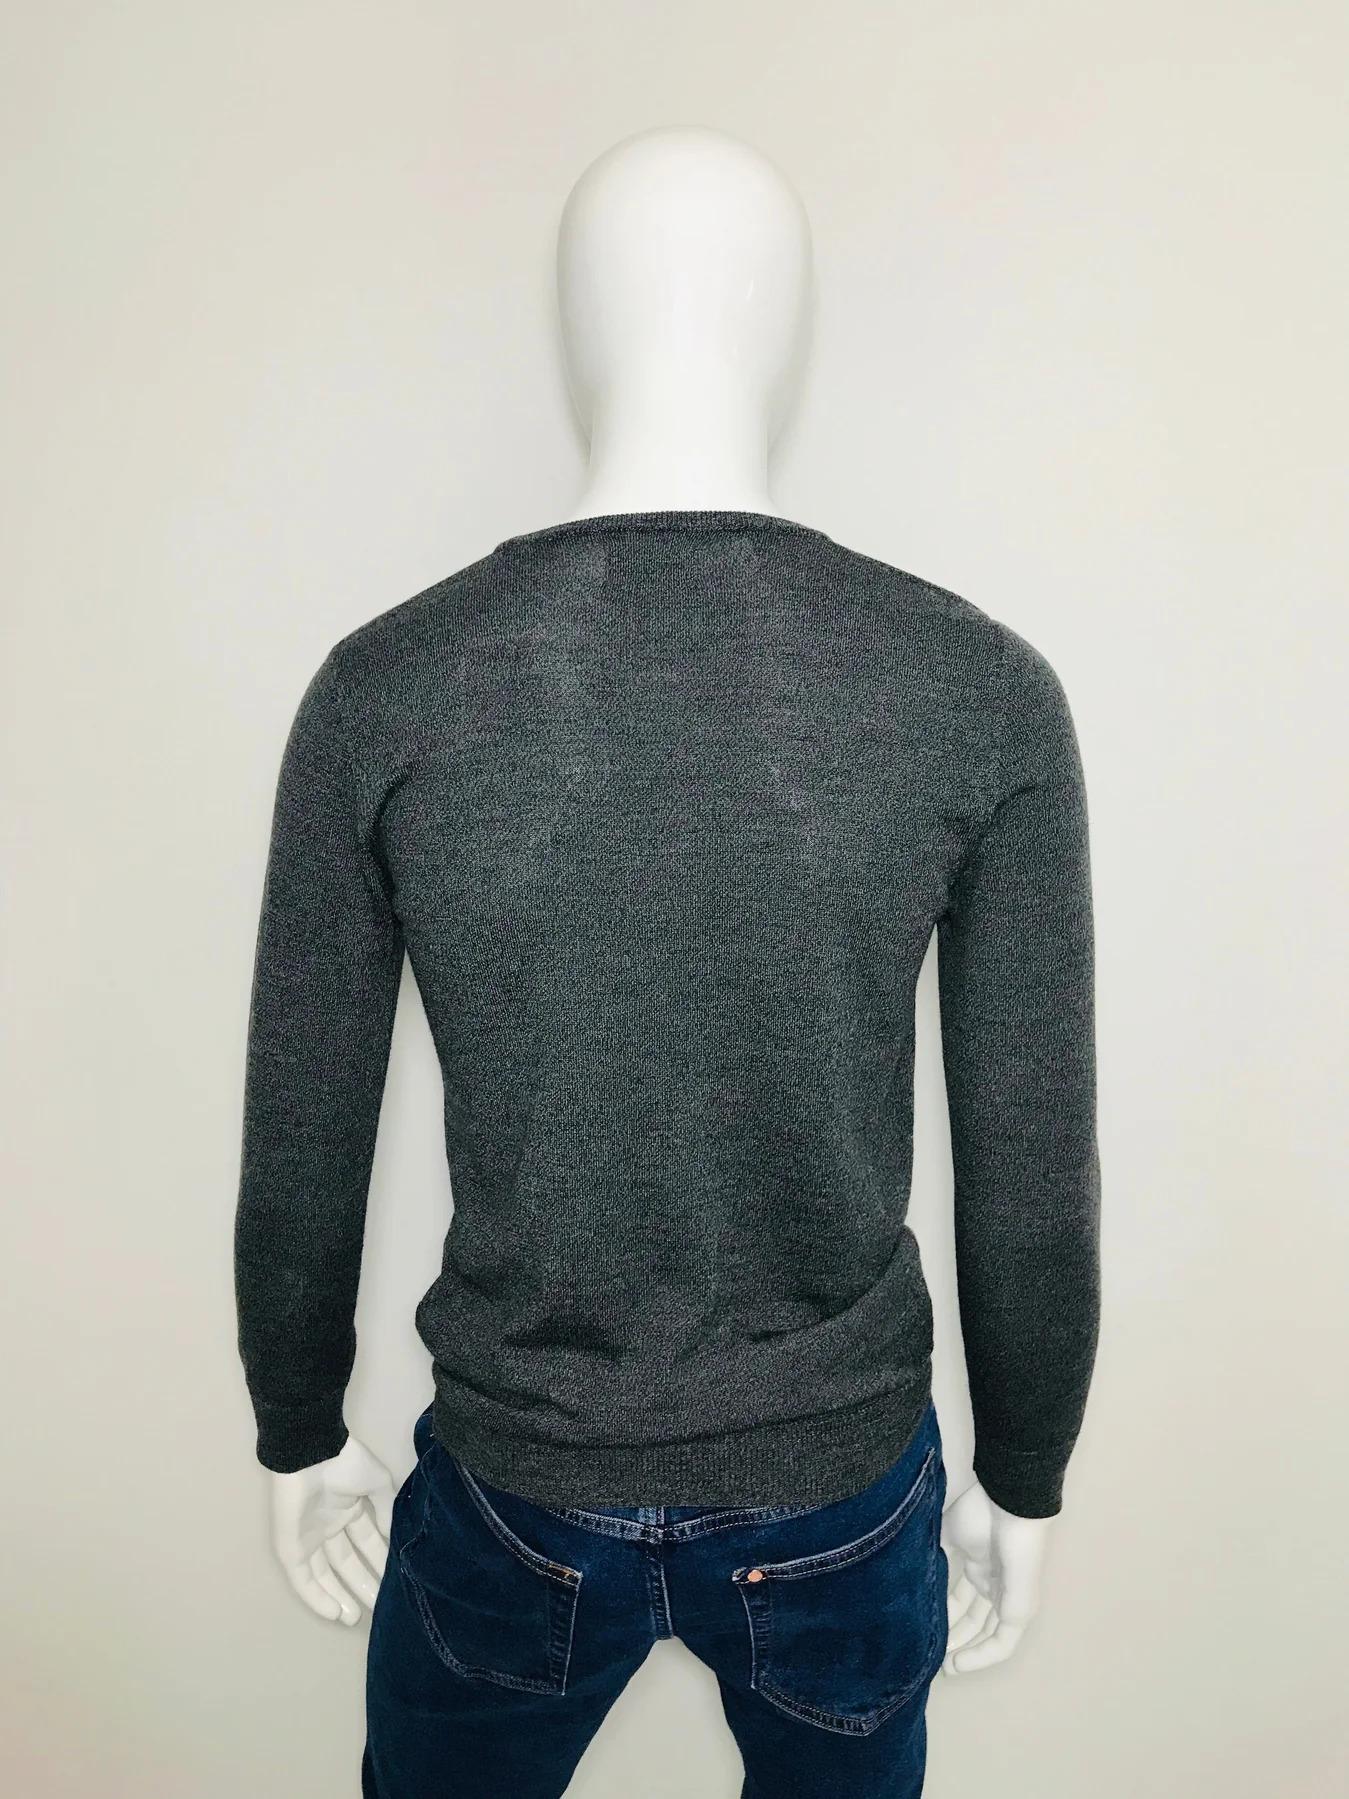 Oliver Spencer Sweater In Excellent Condition For Sale In London, GB